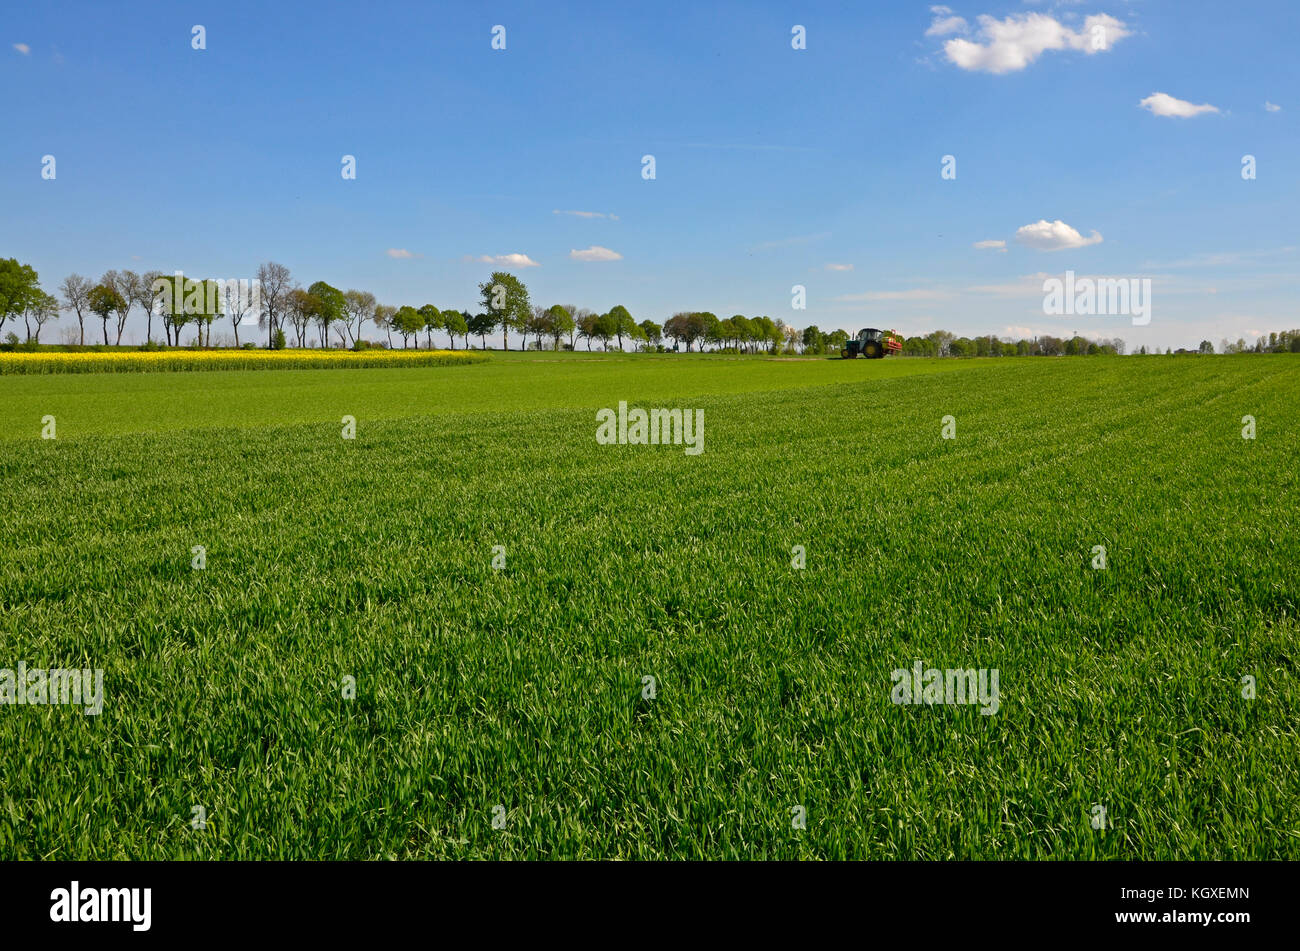 A rural landscape: a field of green wheat in spring with a line of trees and a patch of yellow canola Stock Photo